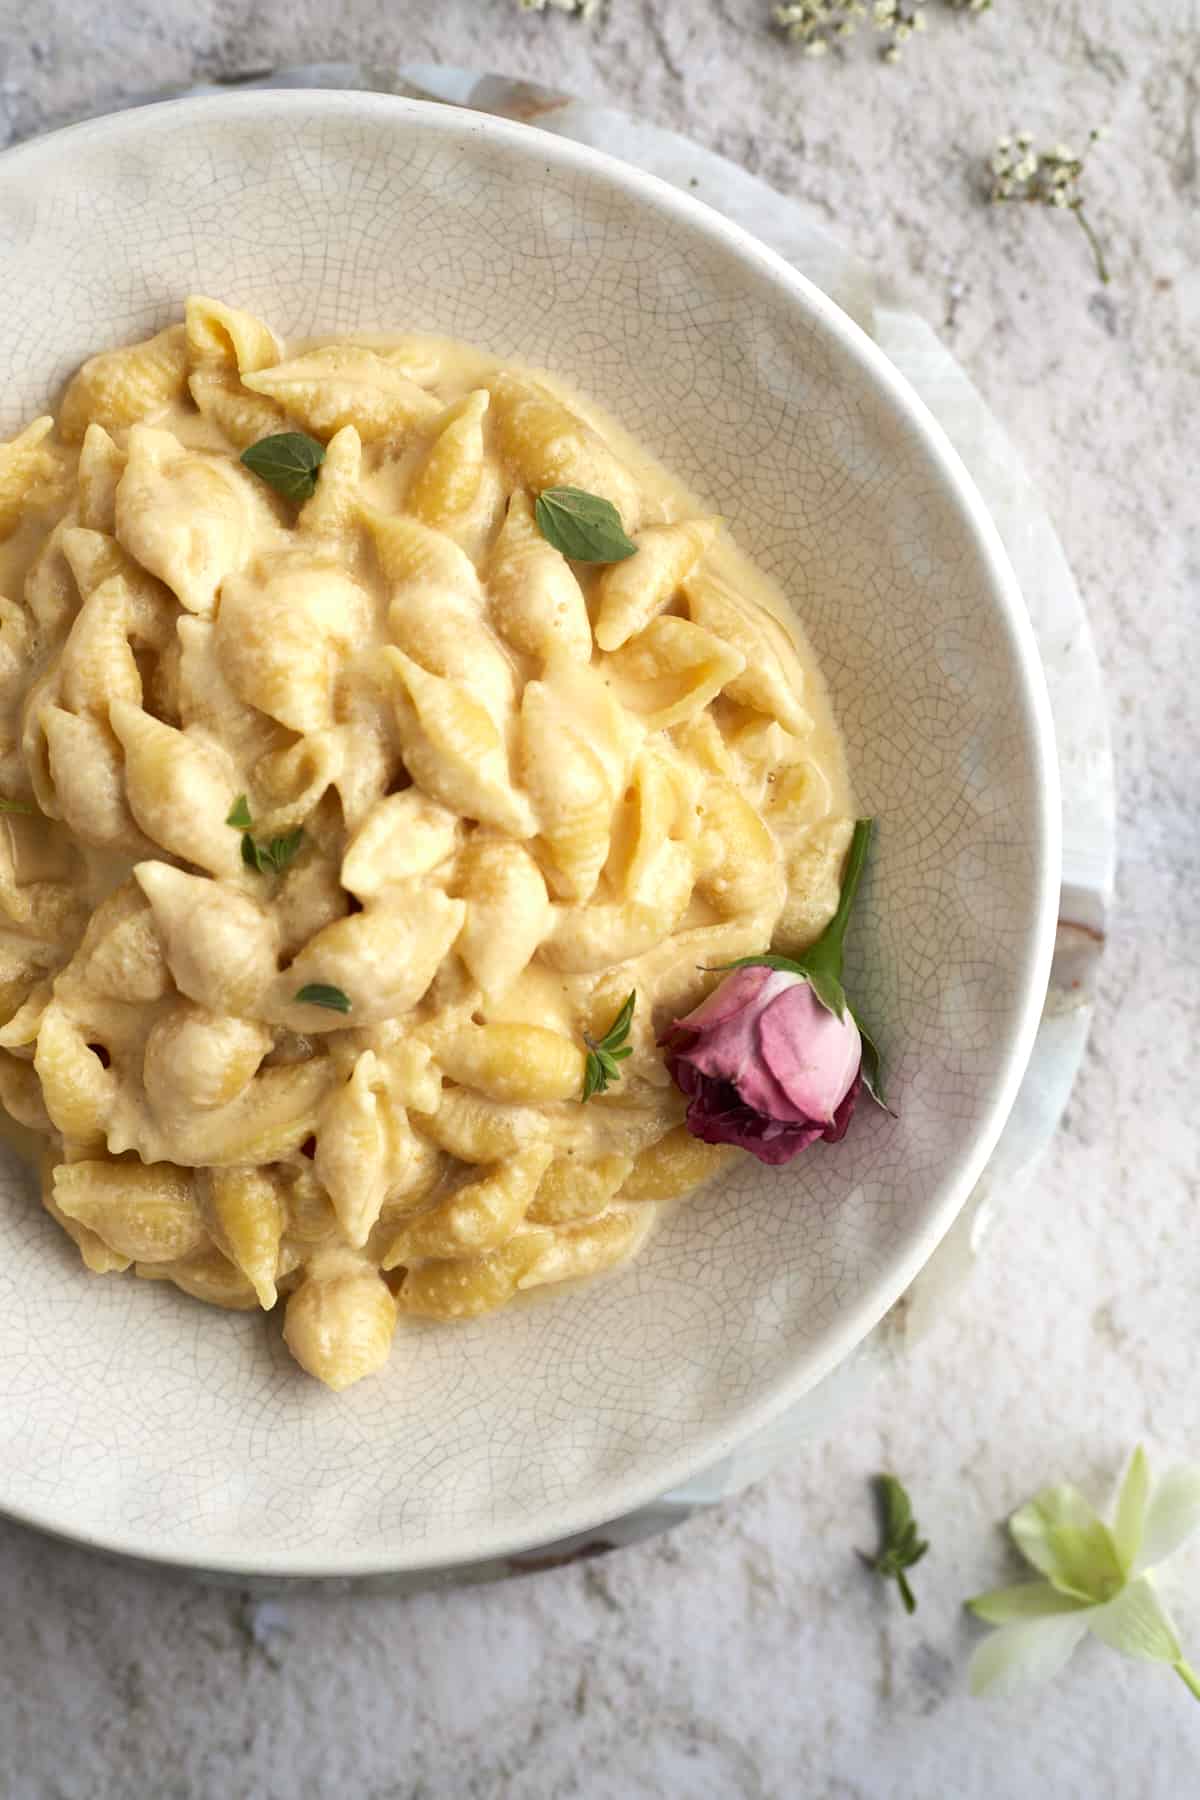 Chrissy Teigen’s One Pot Mac and Cheese